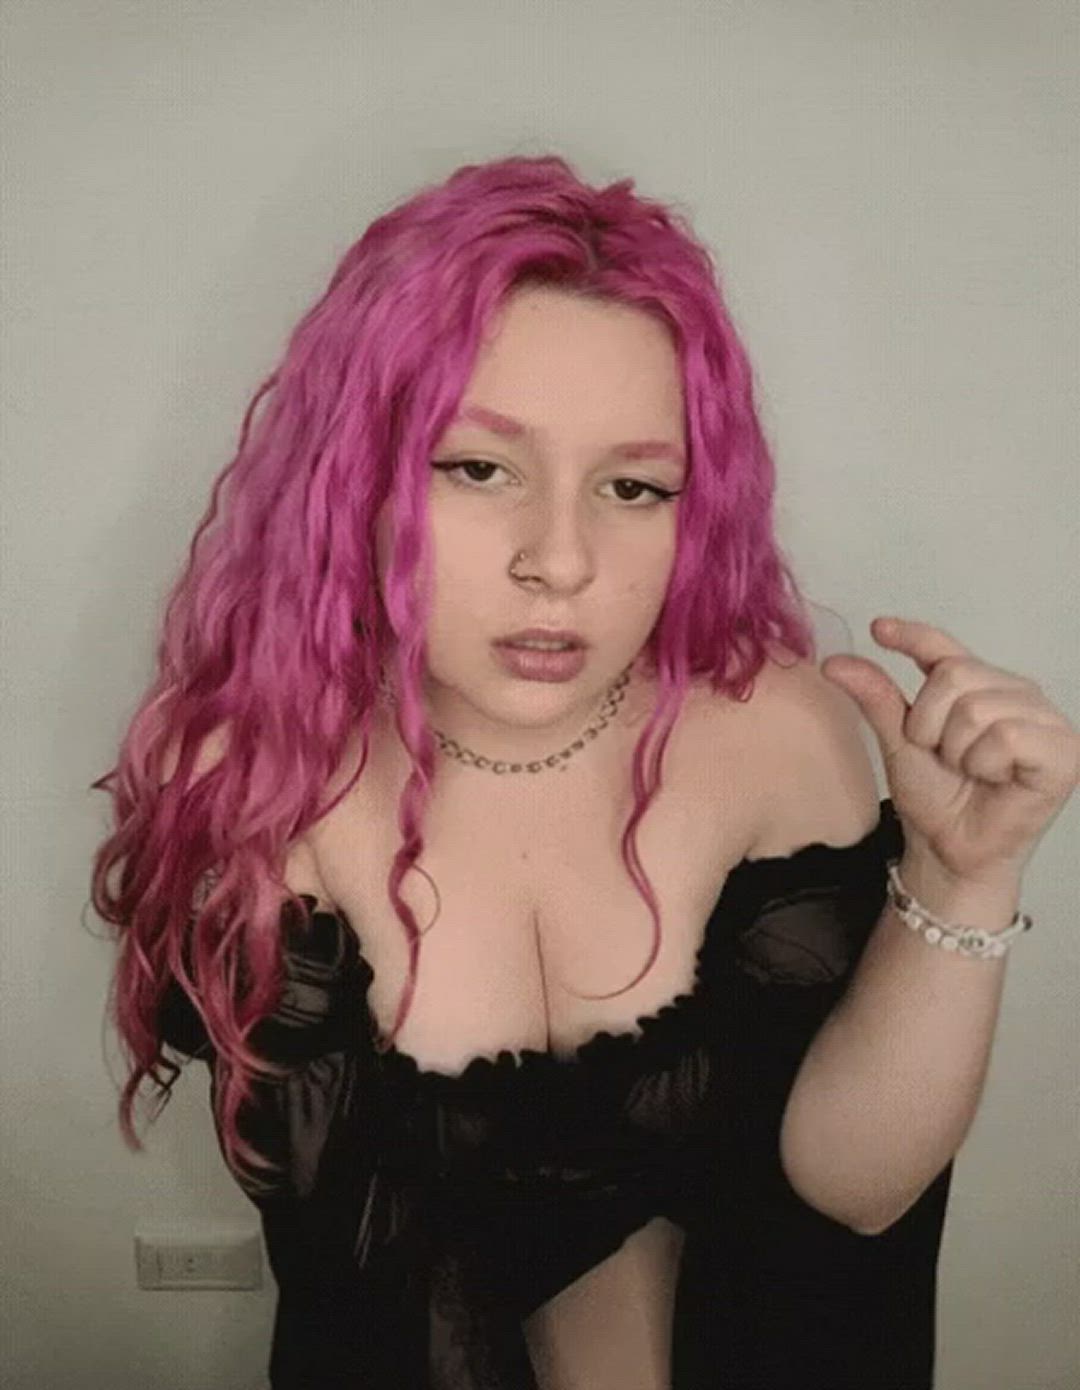 R/sph porn video with onlyfans model xmistresslilithx <strong>@xmistresslilithx</strong>